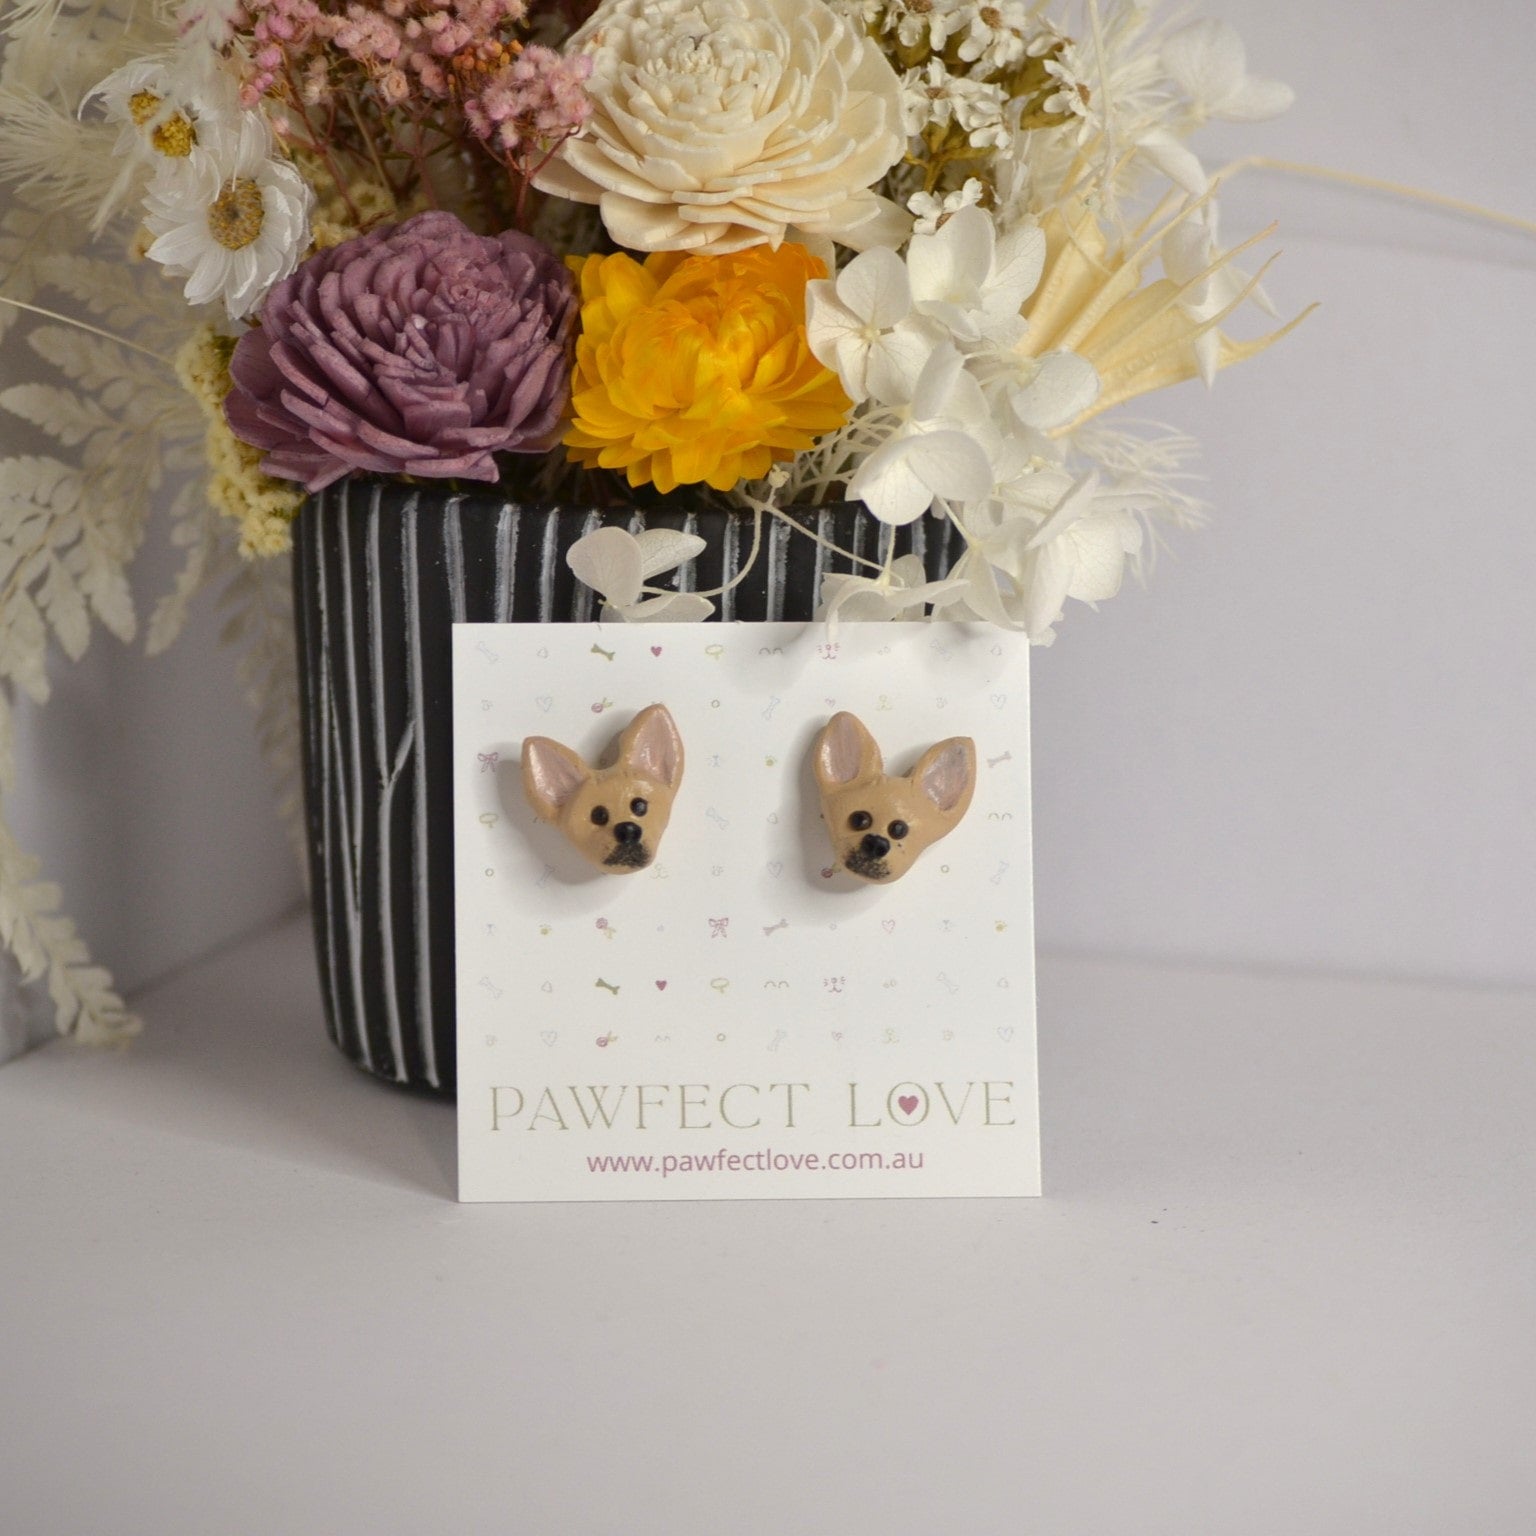 Handmade Chihuahua stud earrings by Pawfect Love, positioned in front of dried flower arrangement